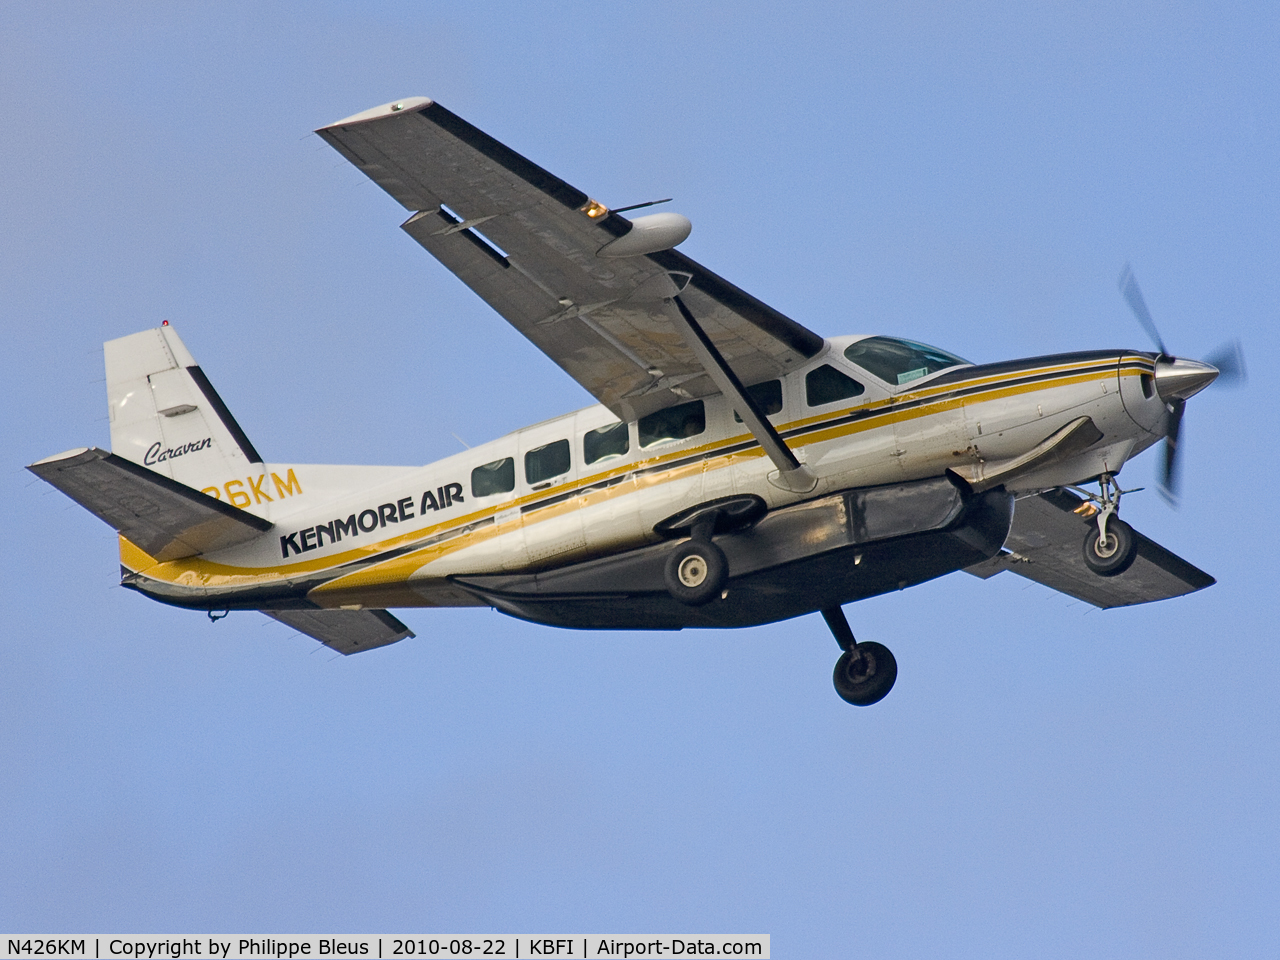 N426KM, 1999 Cessna 208 C/N 20800306, Climbing above rwy 13R in the late afternoon.